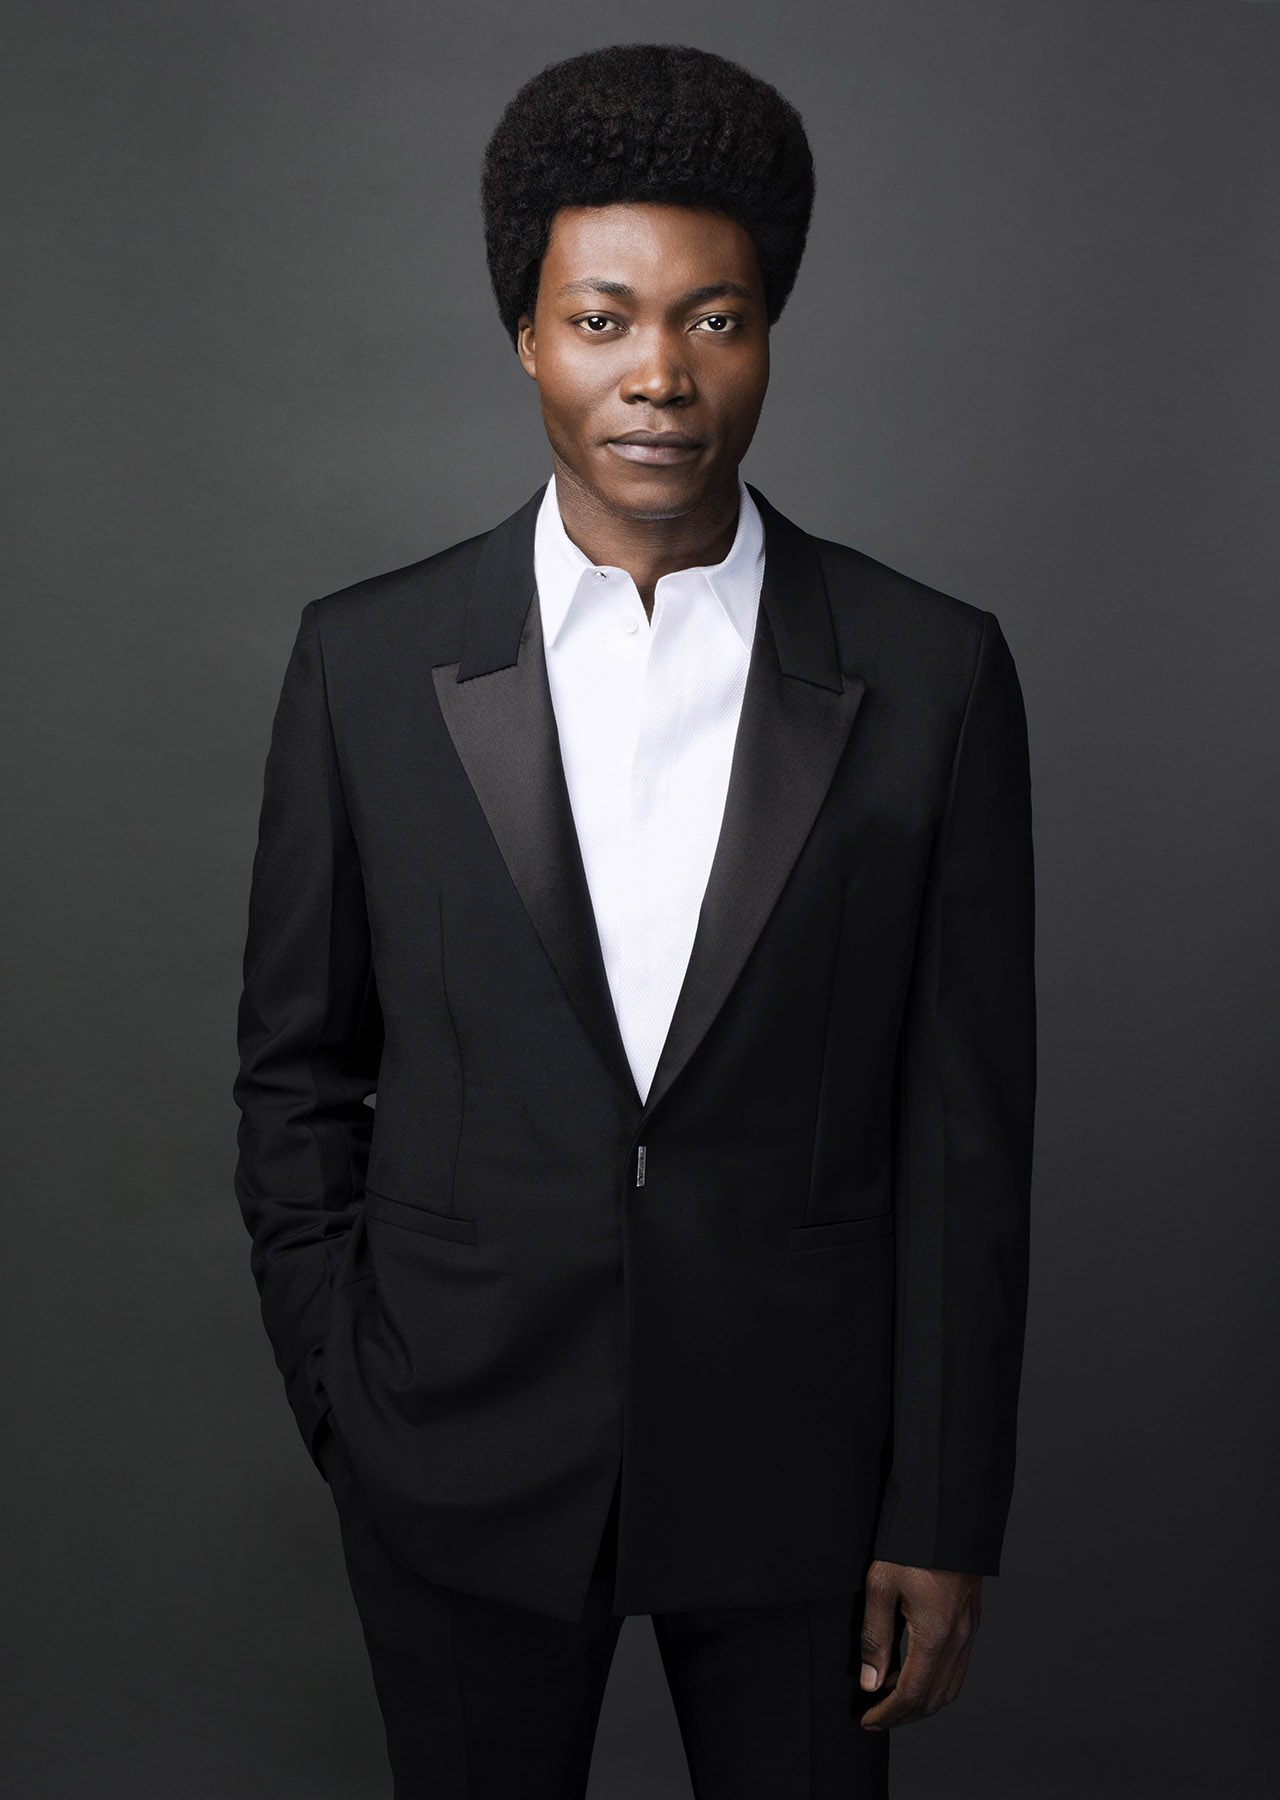 Givenchy, Givenchy Gentleman, Benjamin Clementine